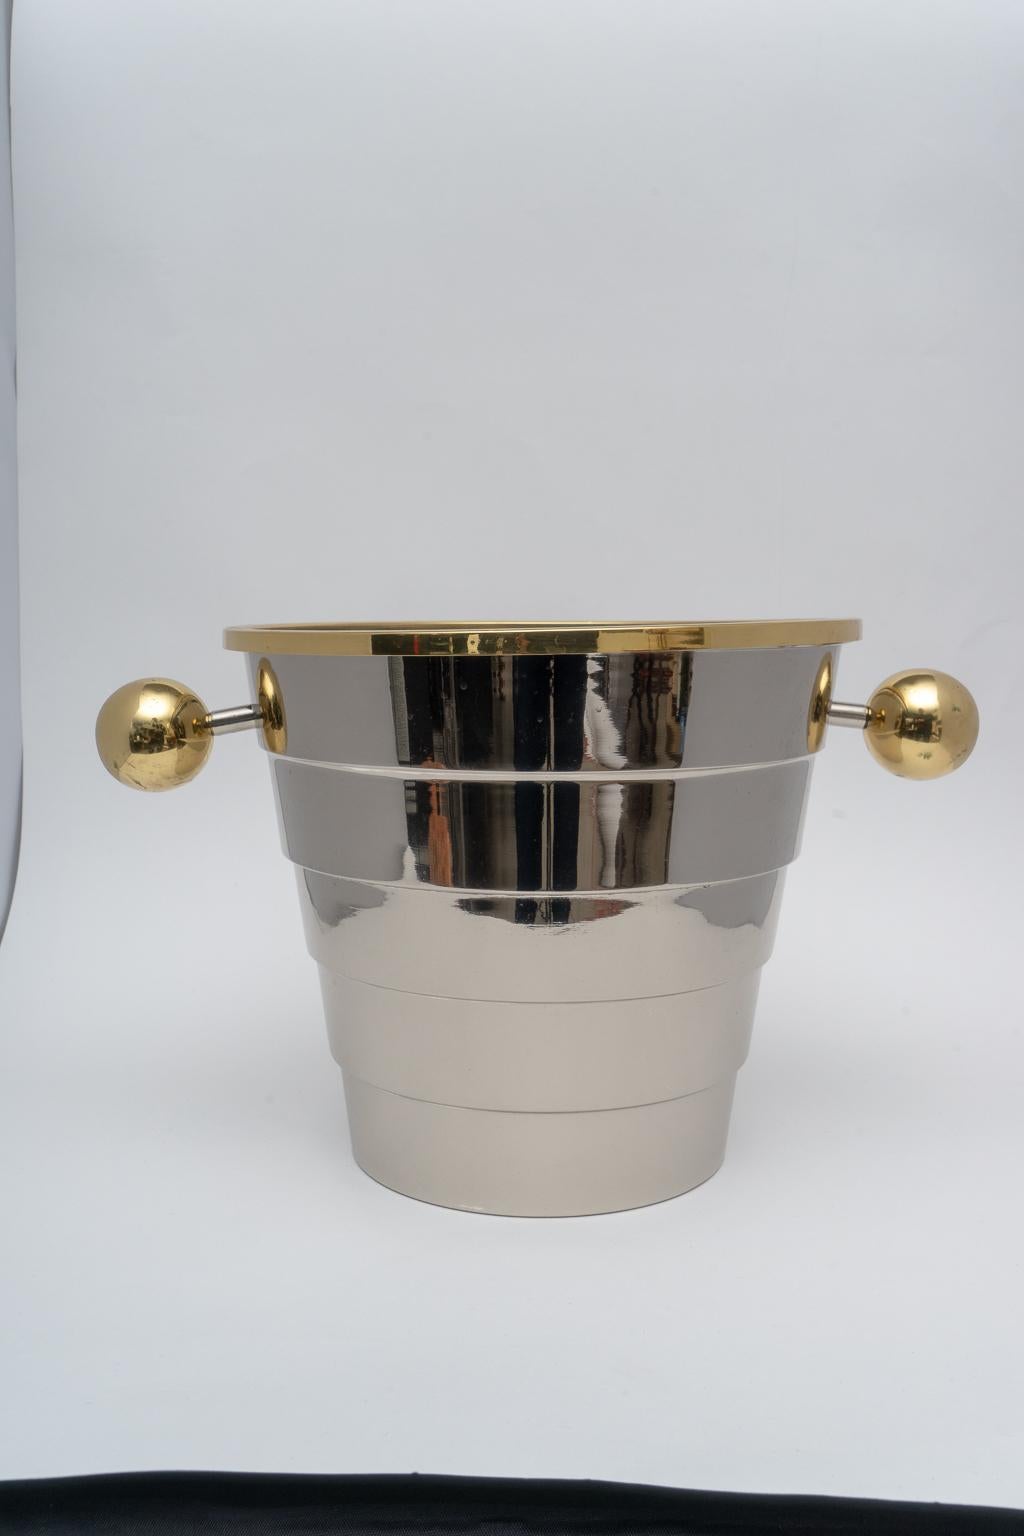 This stylish brass and stainless steel Art Deco style ice bucked was designed by Larry Laslo for Towle and it dates to the 1980s.

Note: This piece has been professionally polished.